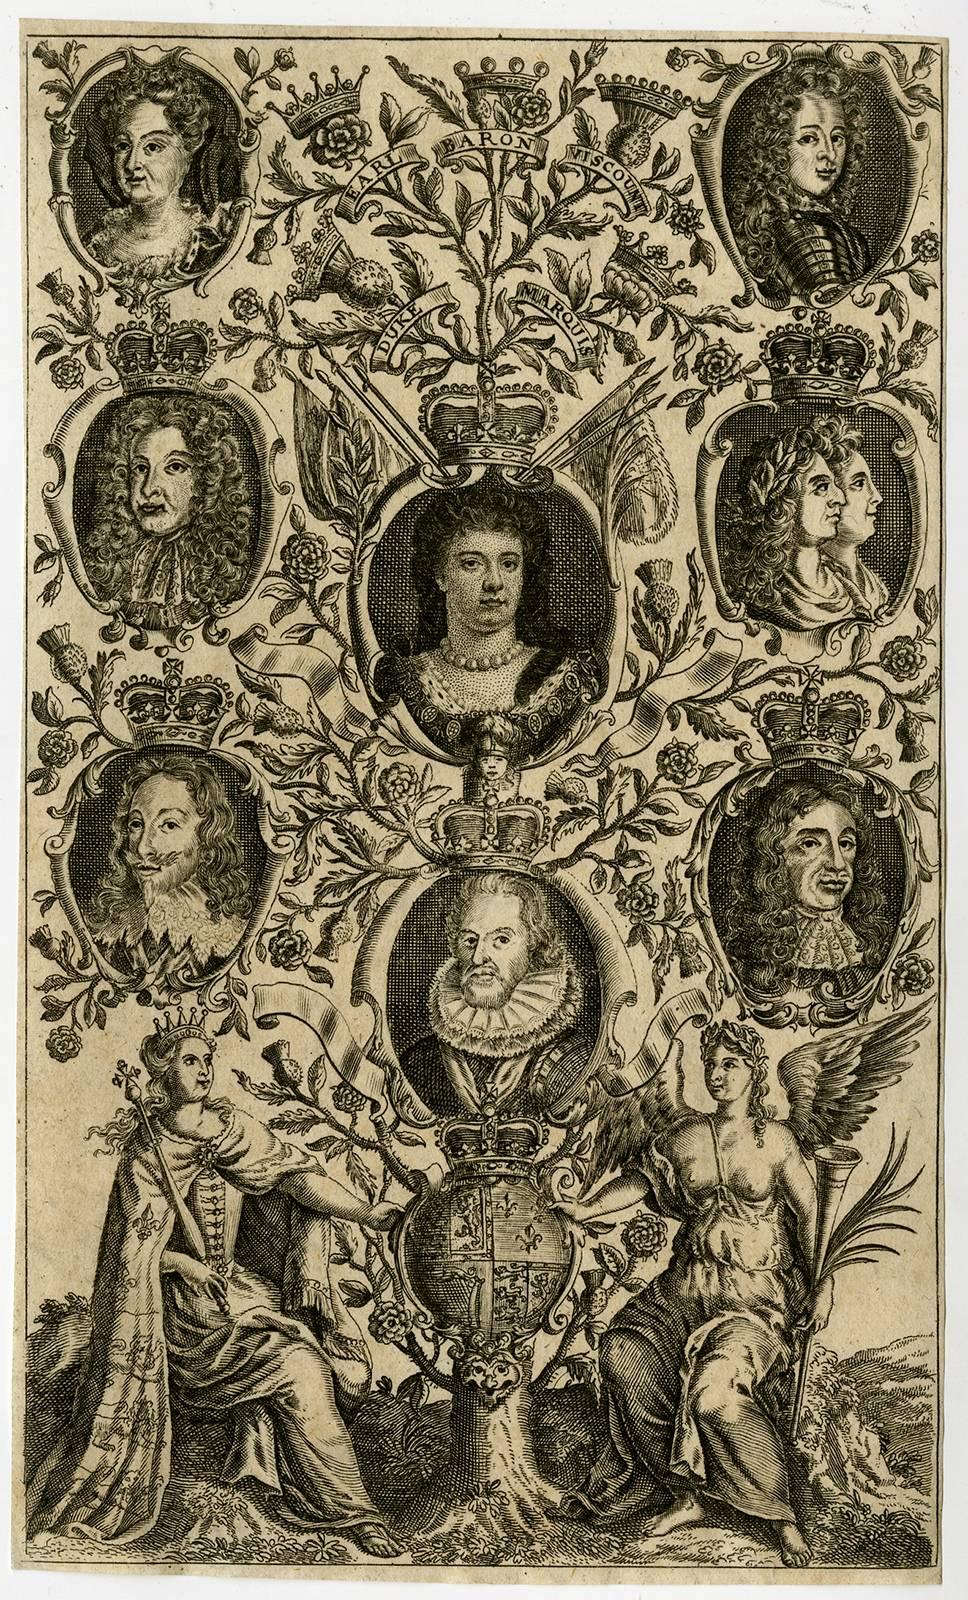 Unknown Portrait Print - Untitle - Portrait of Anne, queen of England, surrounded by her predecessors.